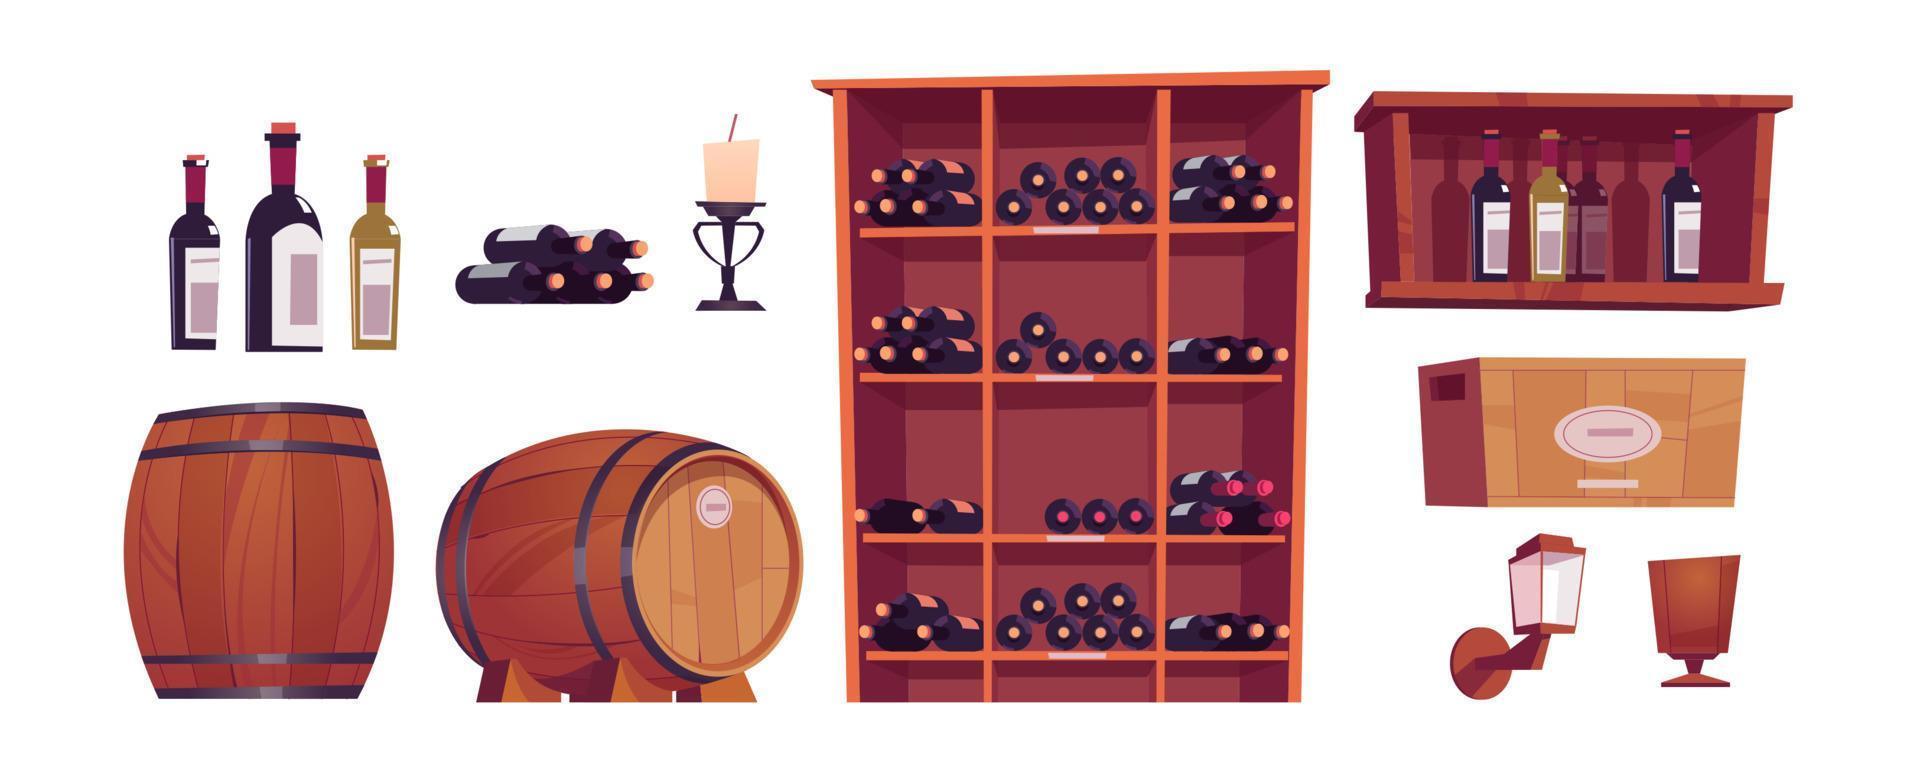 Wine bottles and barrels in winery cellar vector